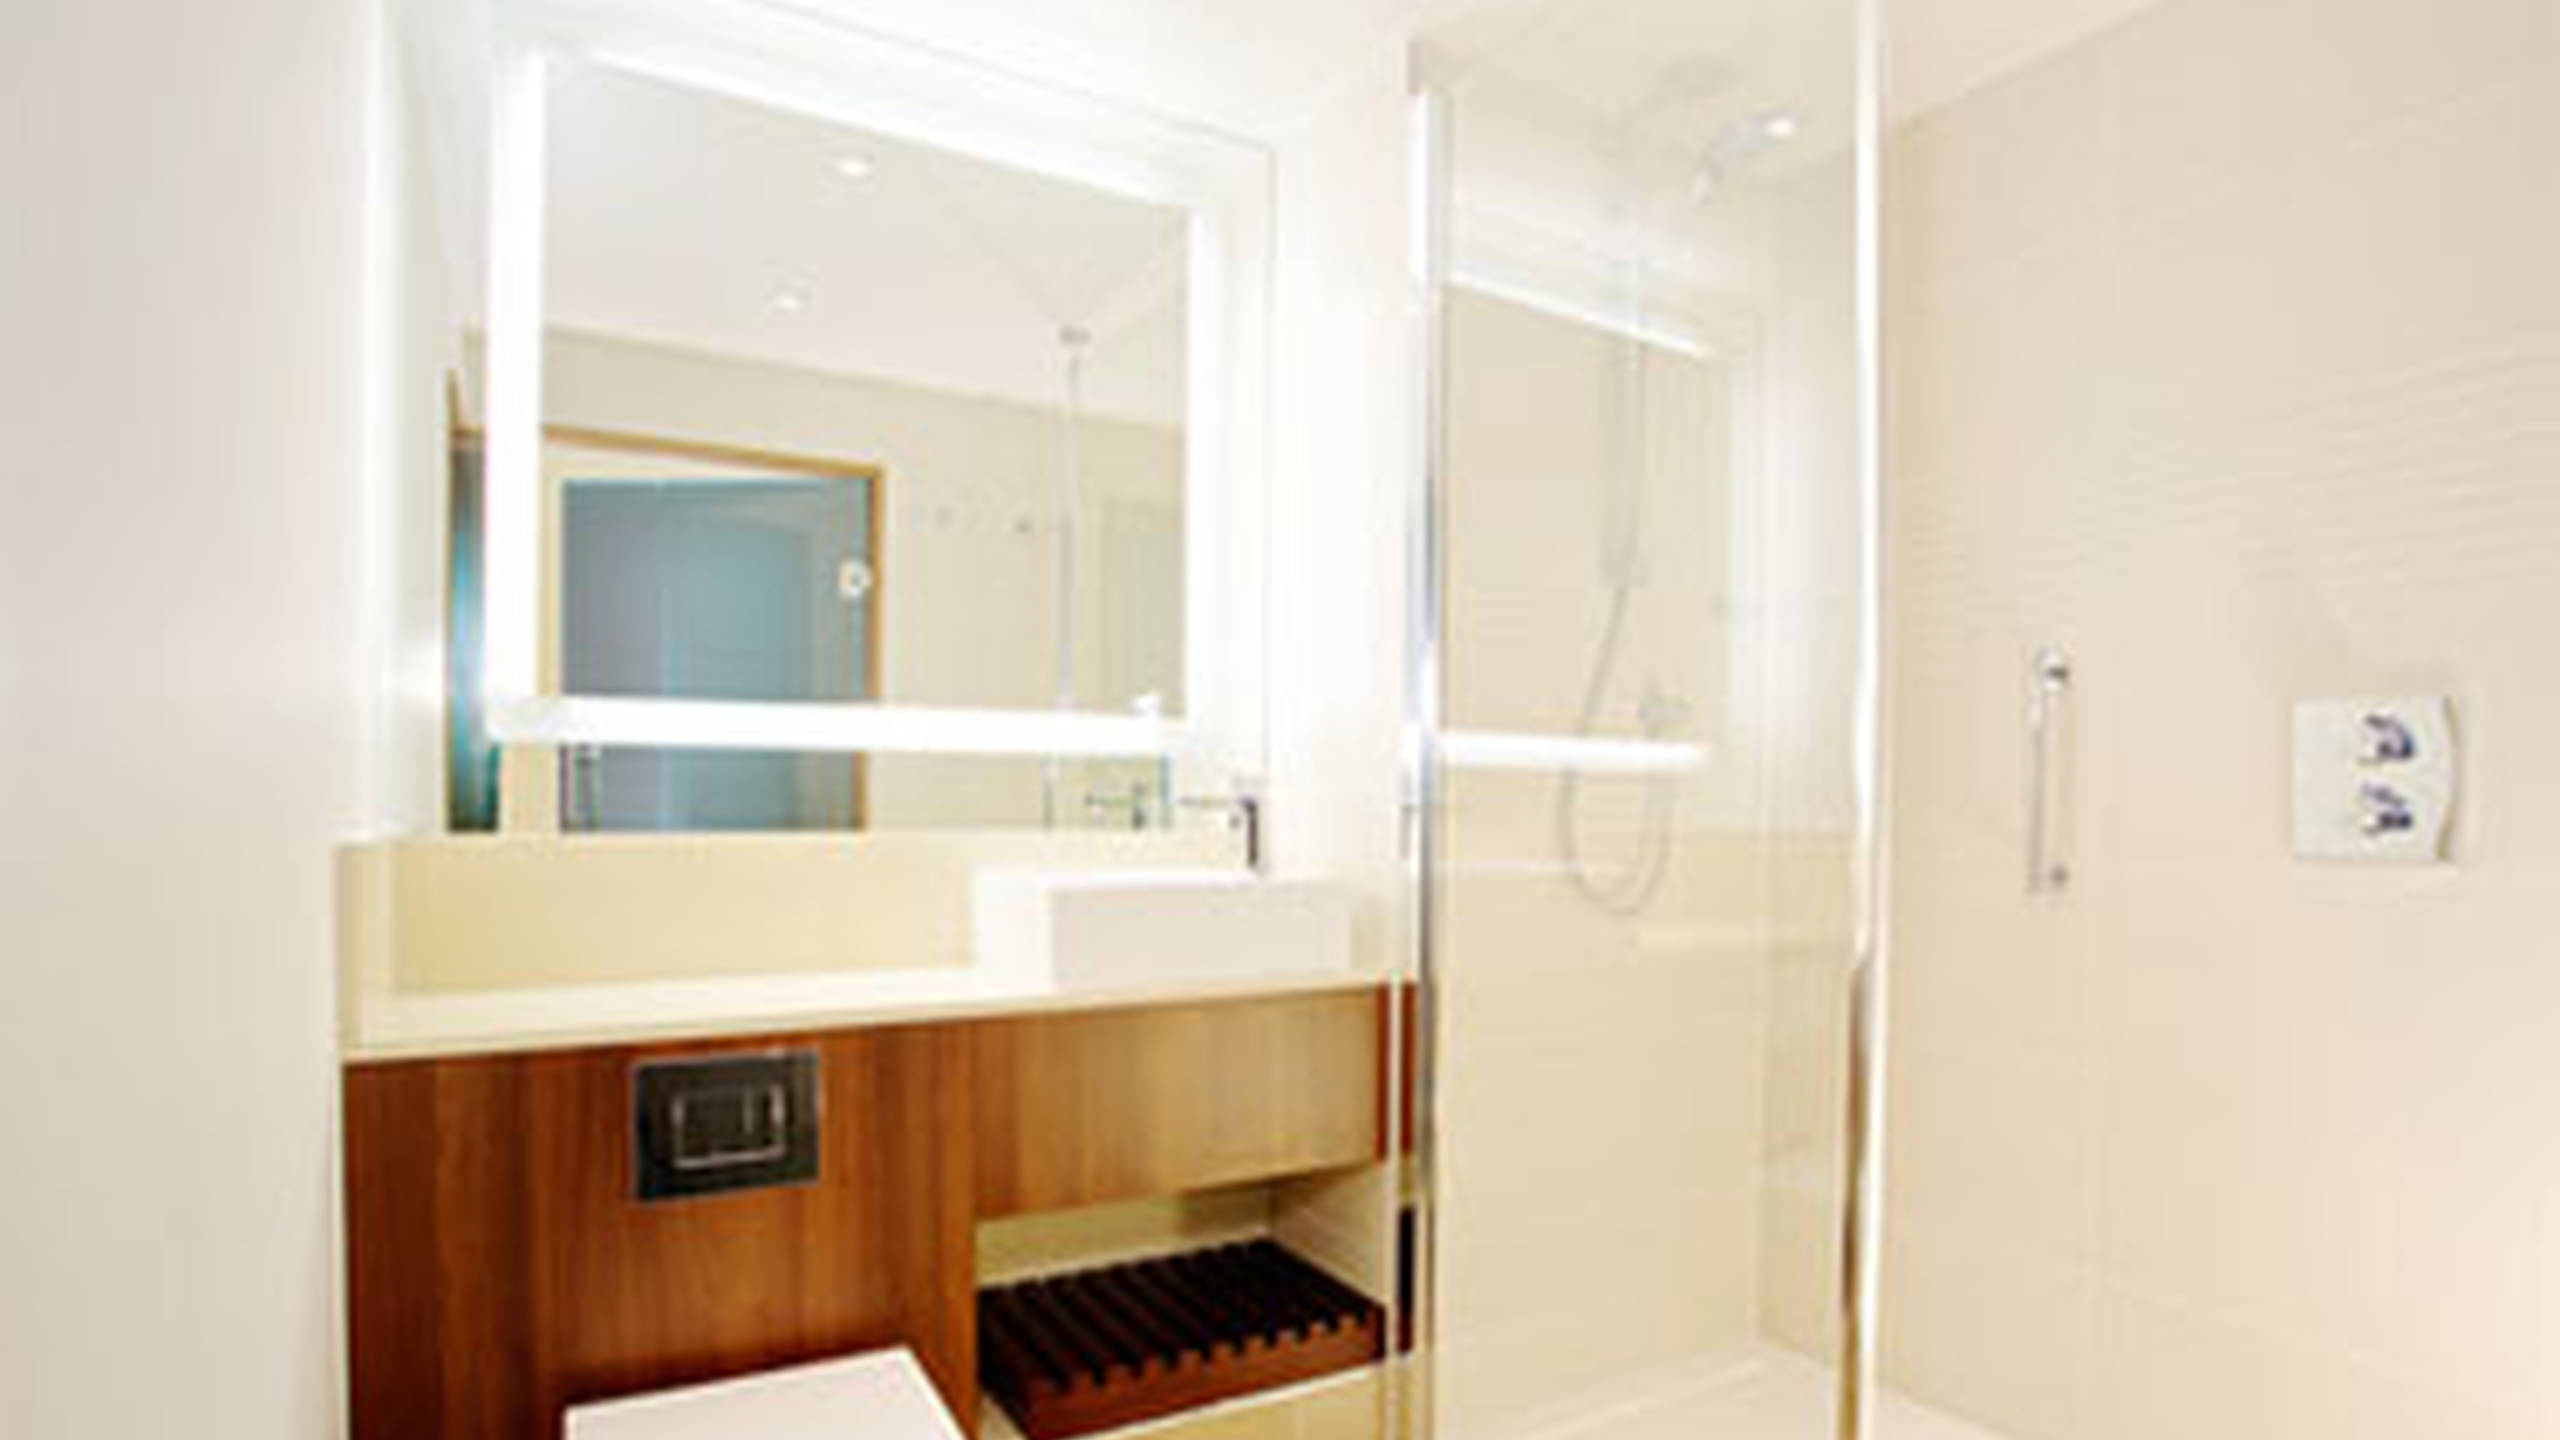 ADMARES awarded contract to deliver modular bathrooms by Wolff & Mueller for courtyard by Marriott Cologne, Germany